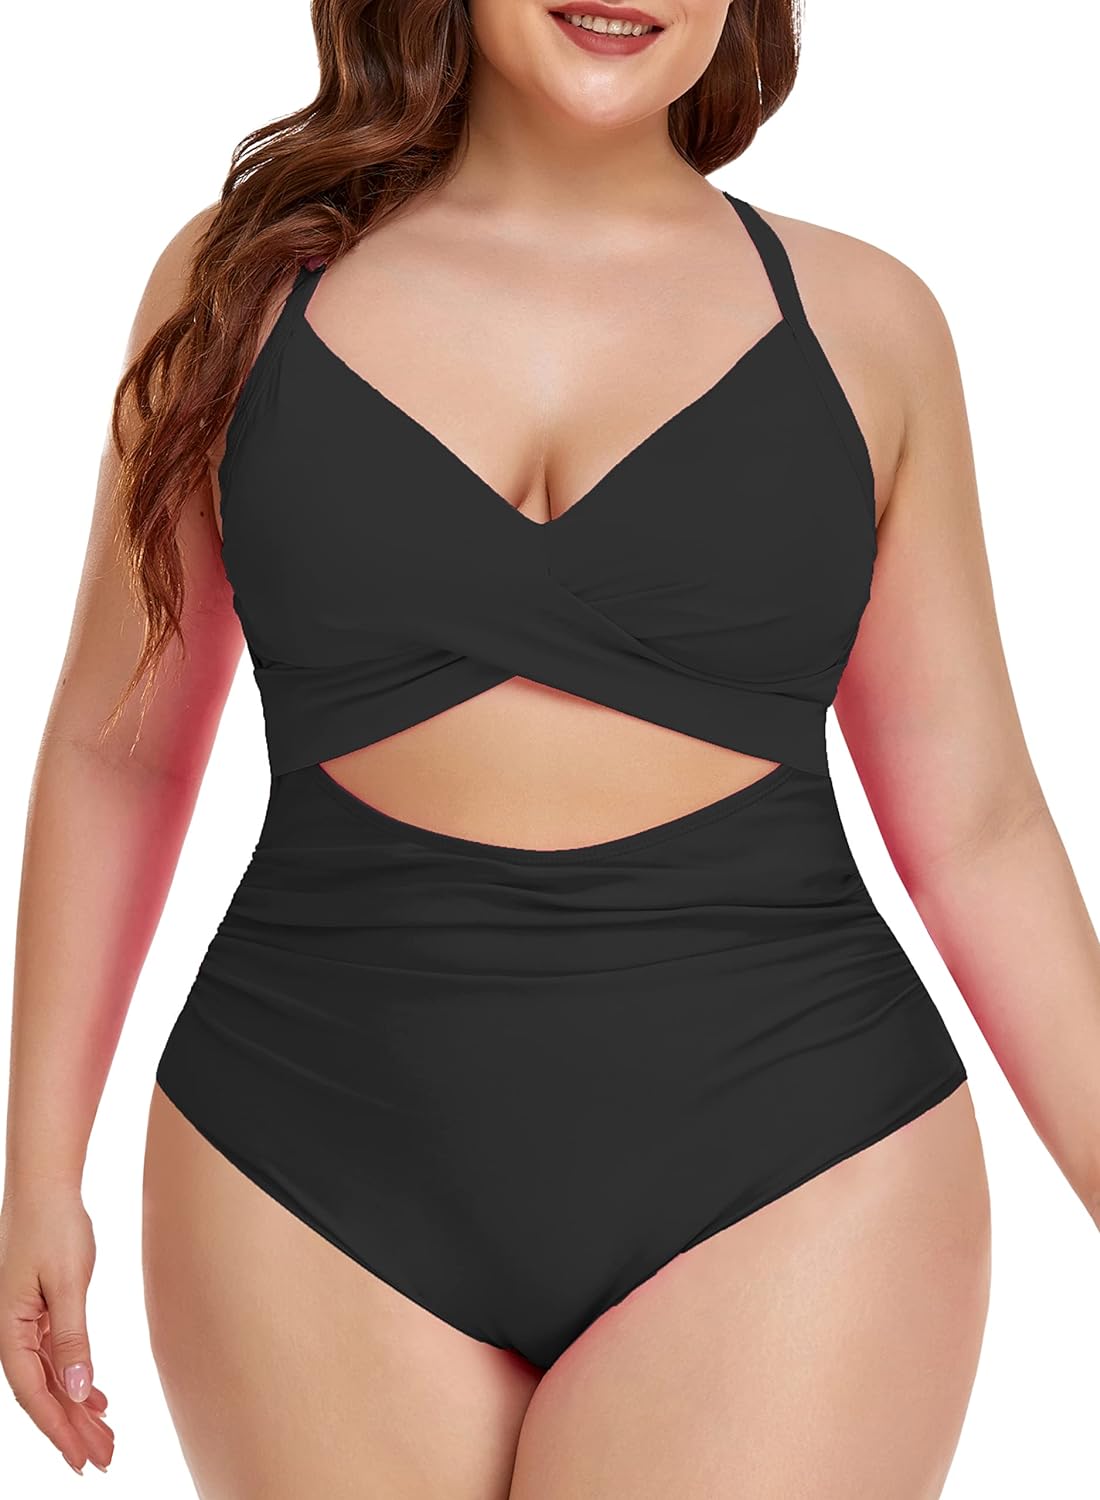 Women's One Piece Swimsuits Tummy Control Cutout High Waisted Bathing Suit Wrap Tie Back 1 Piece Swimsuit